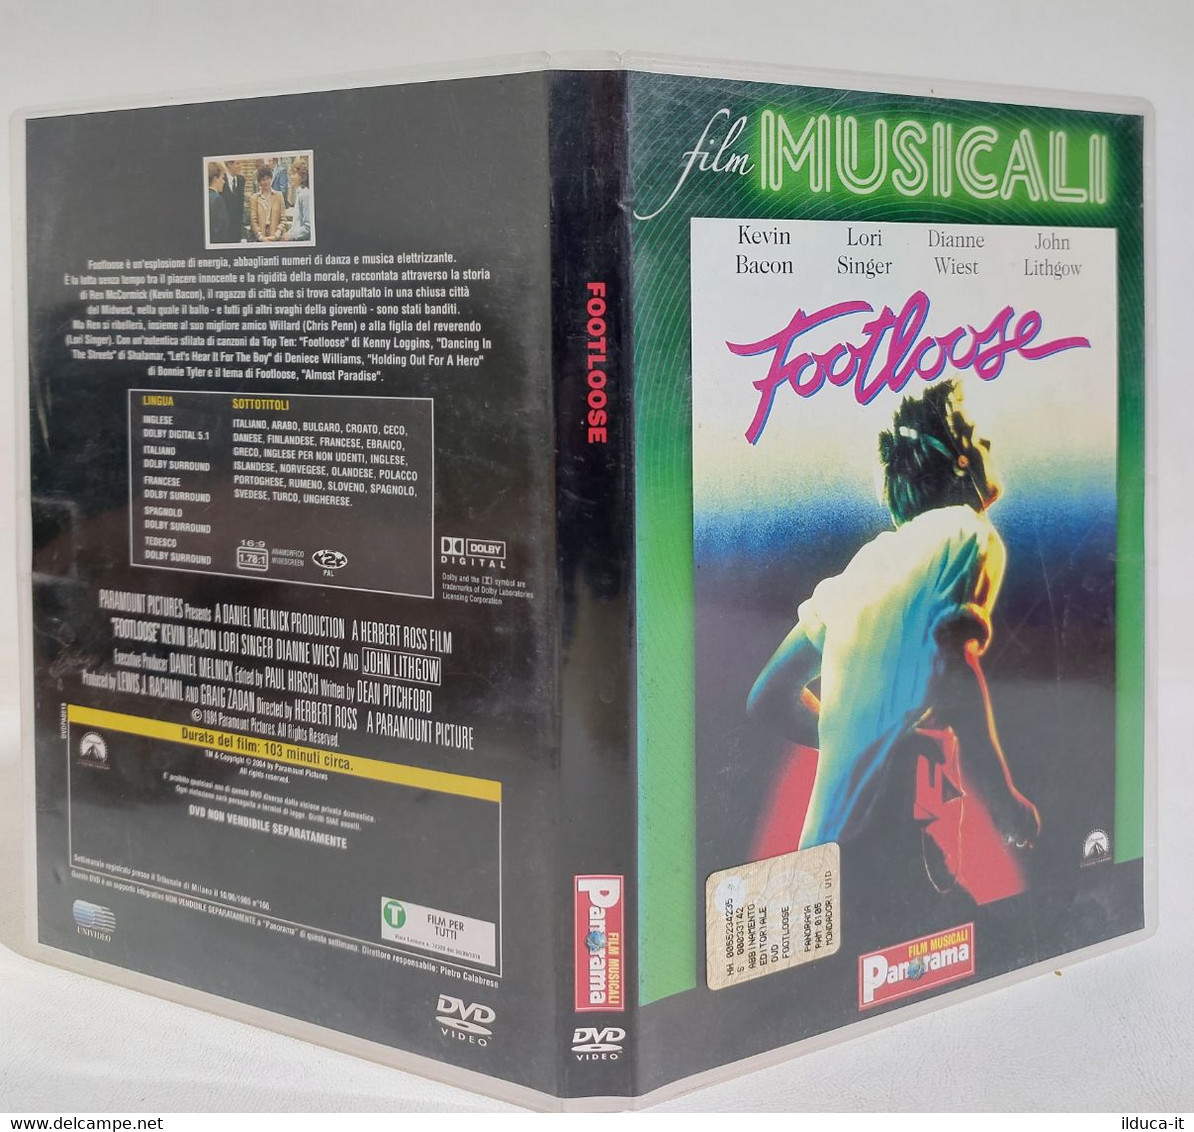 I108655 DVD - FOOTLOOSE (1984) - Kevin Bacon / Lori SInger - Commedia Musicale